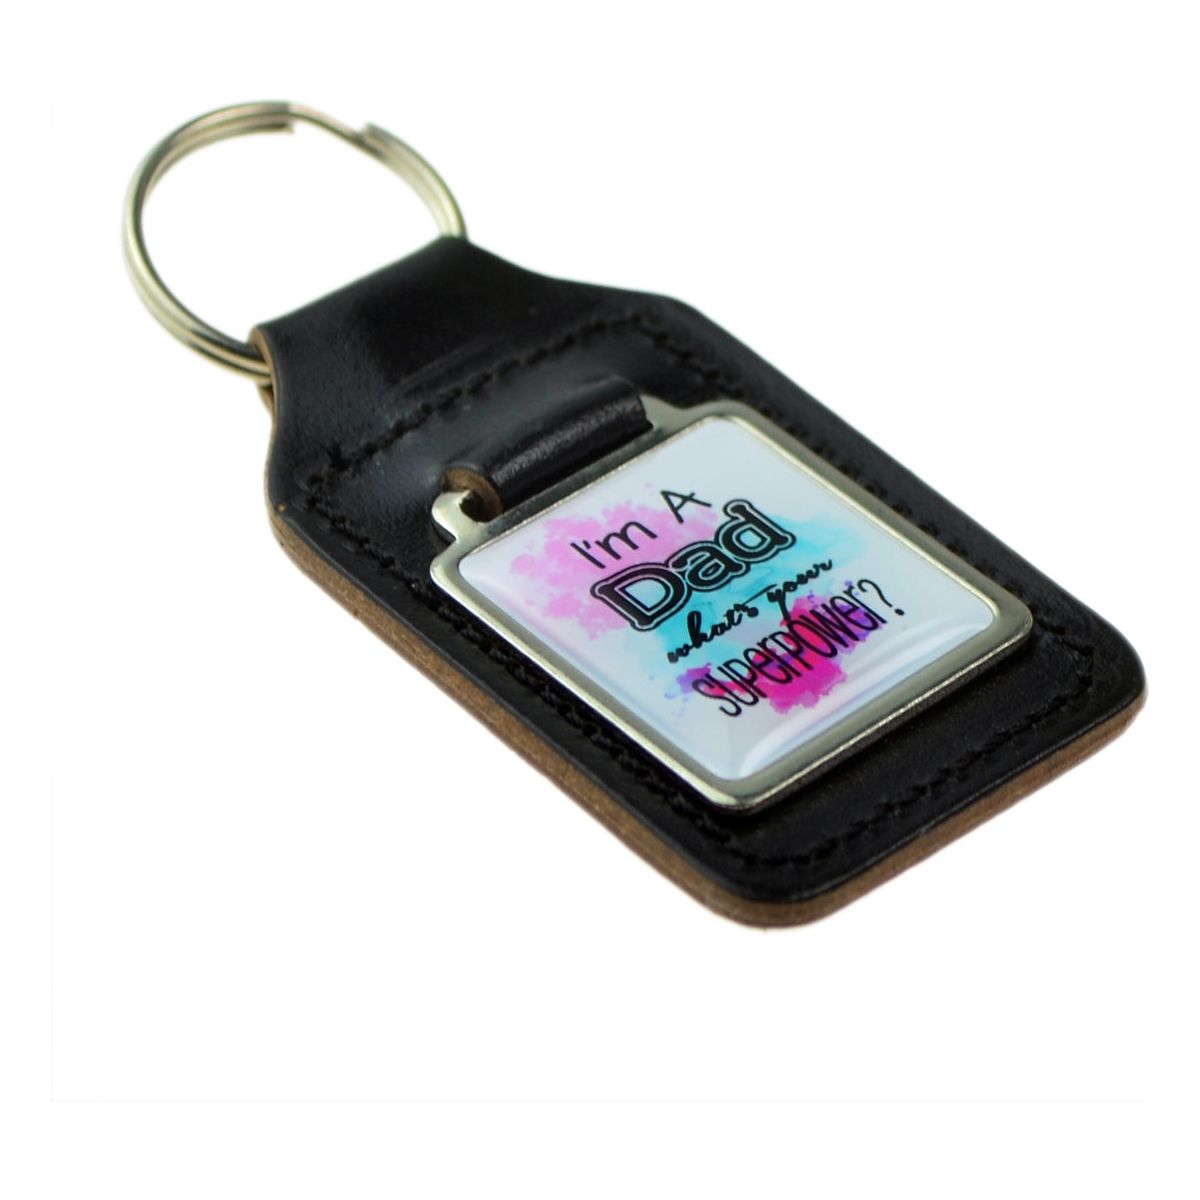 Keyring Key Ring bonded leather key fob Dad with super power - Ashton and Finch